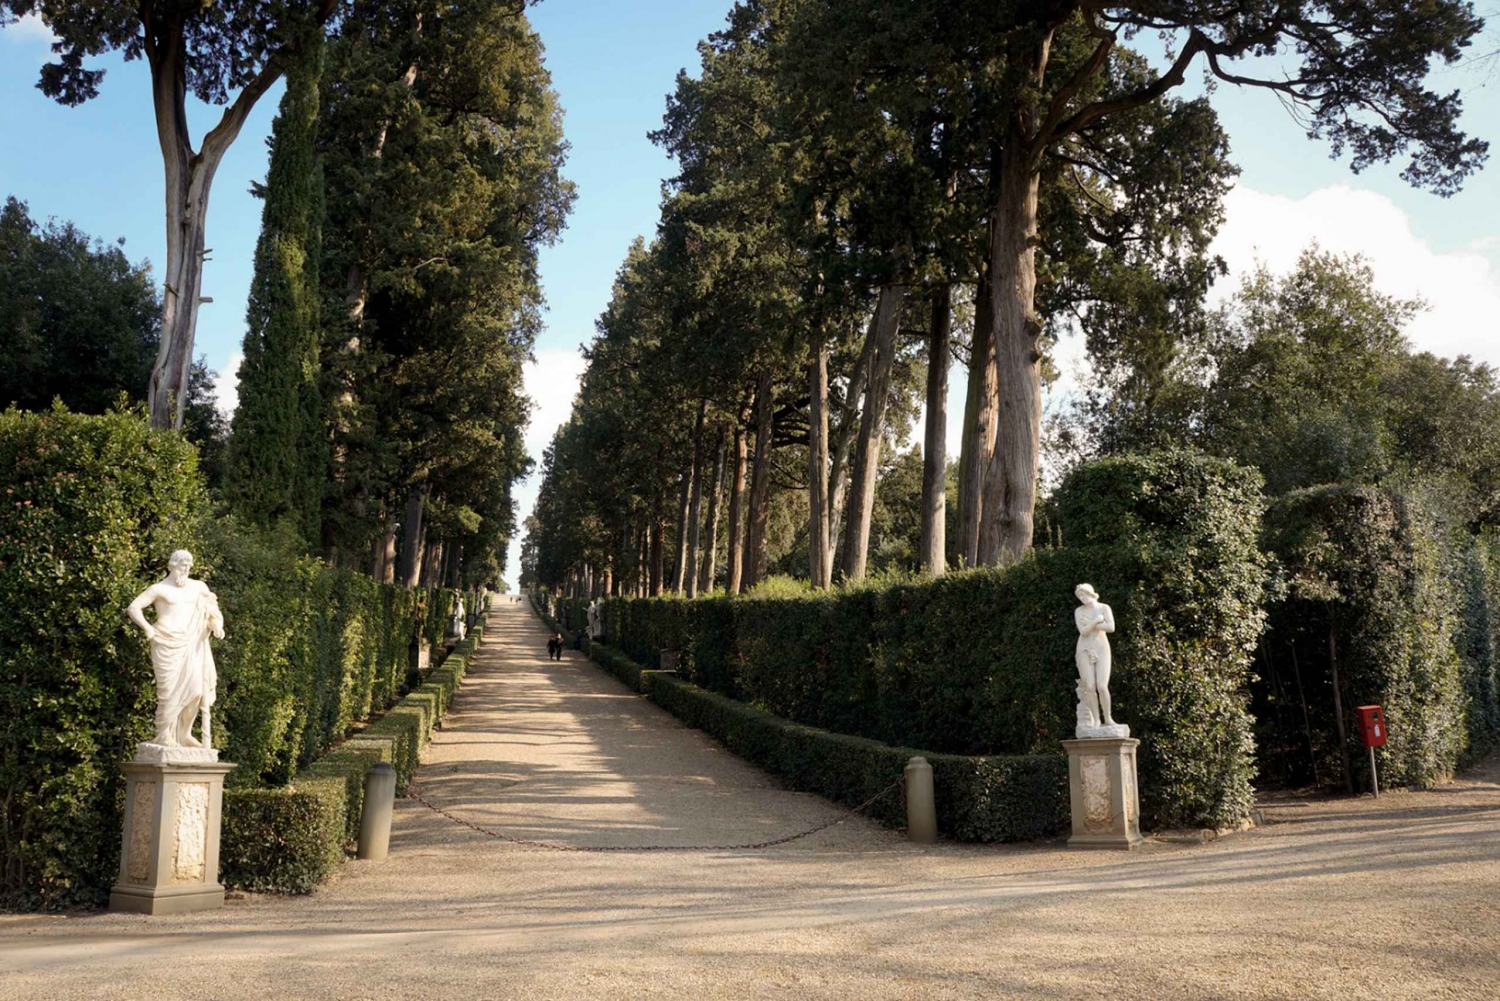 Florence: Pitti Palace Entry Ticket and Guided Walking Tour